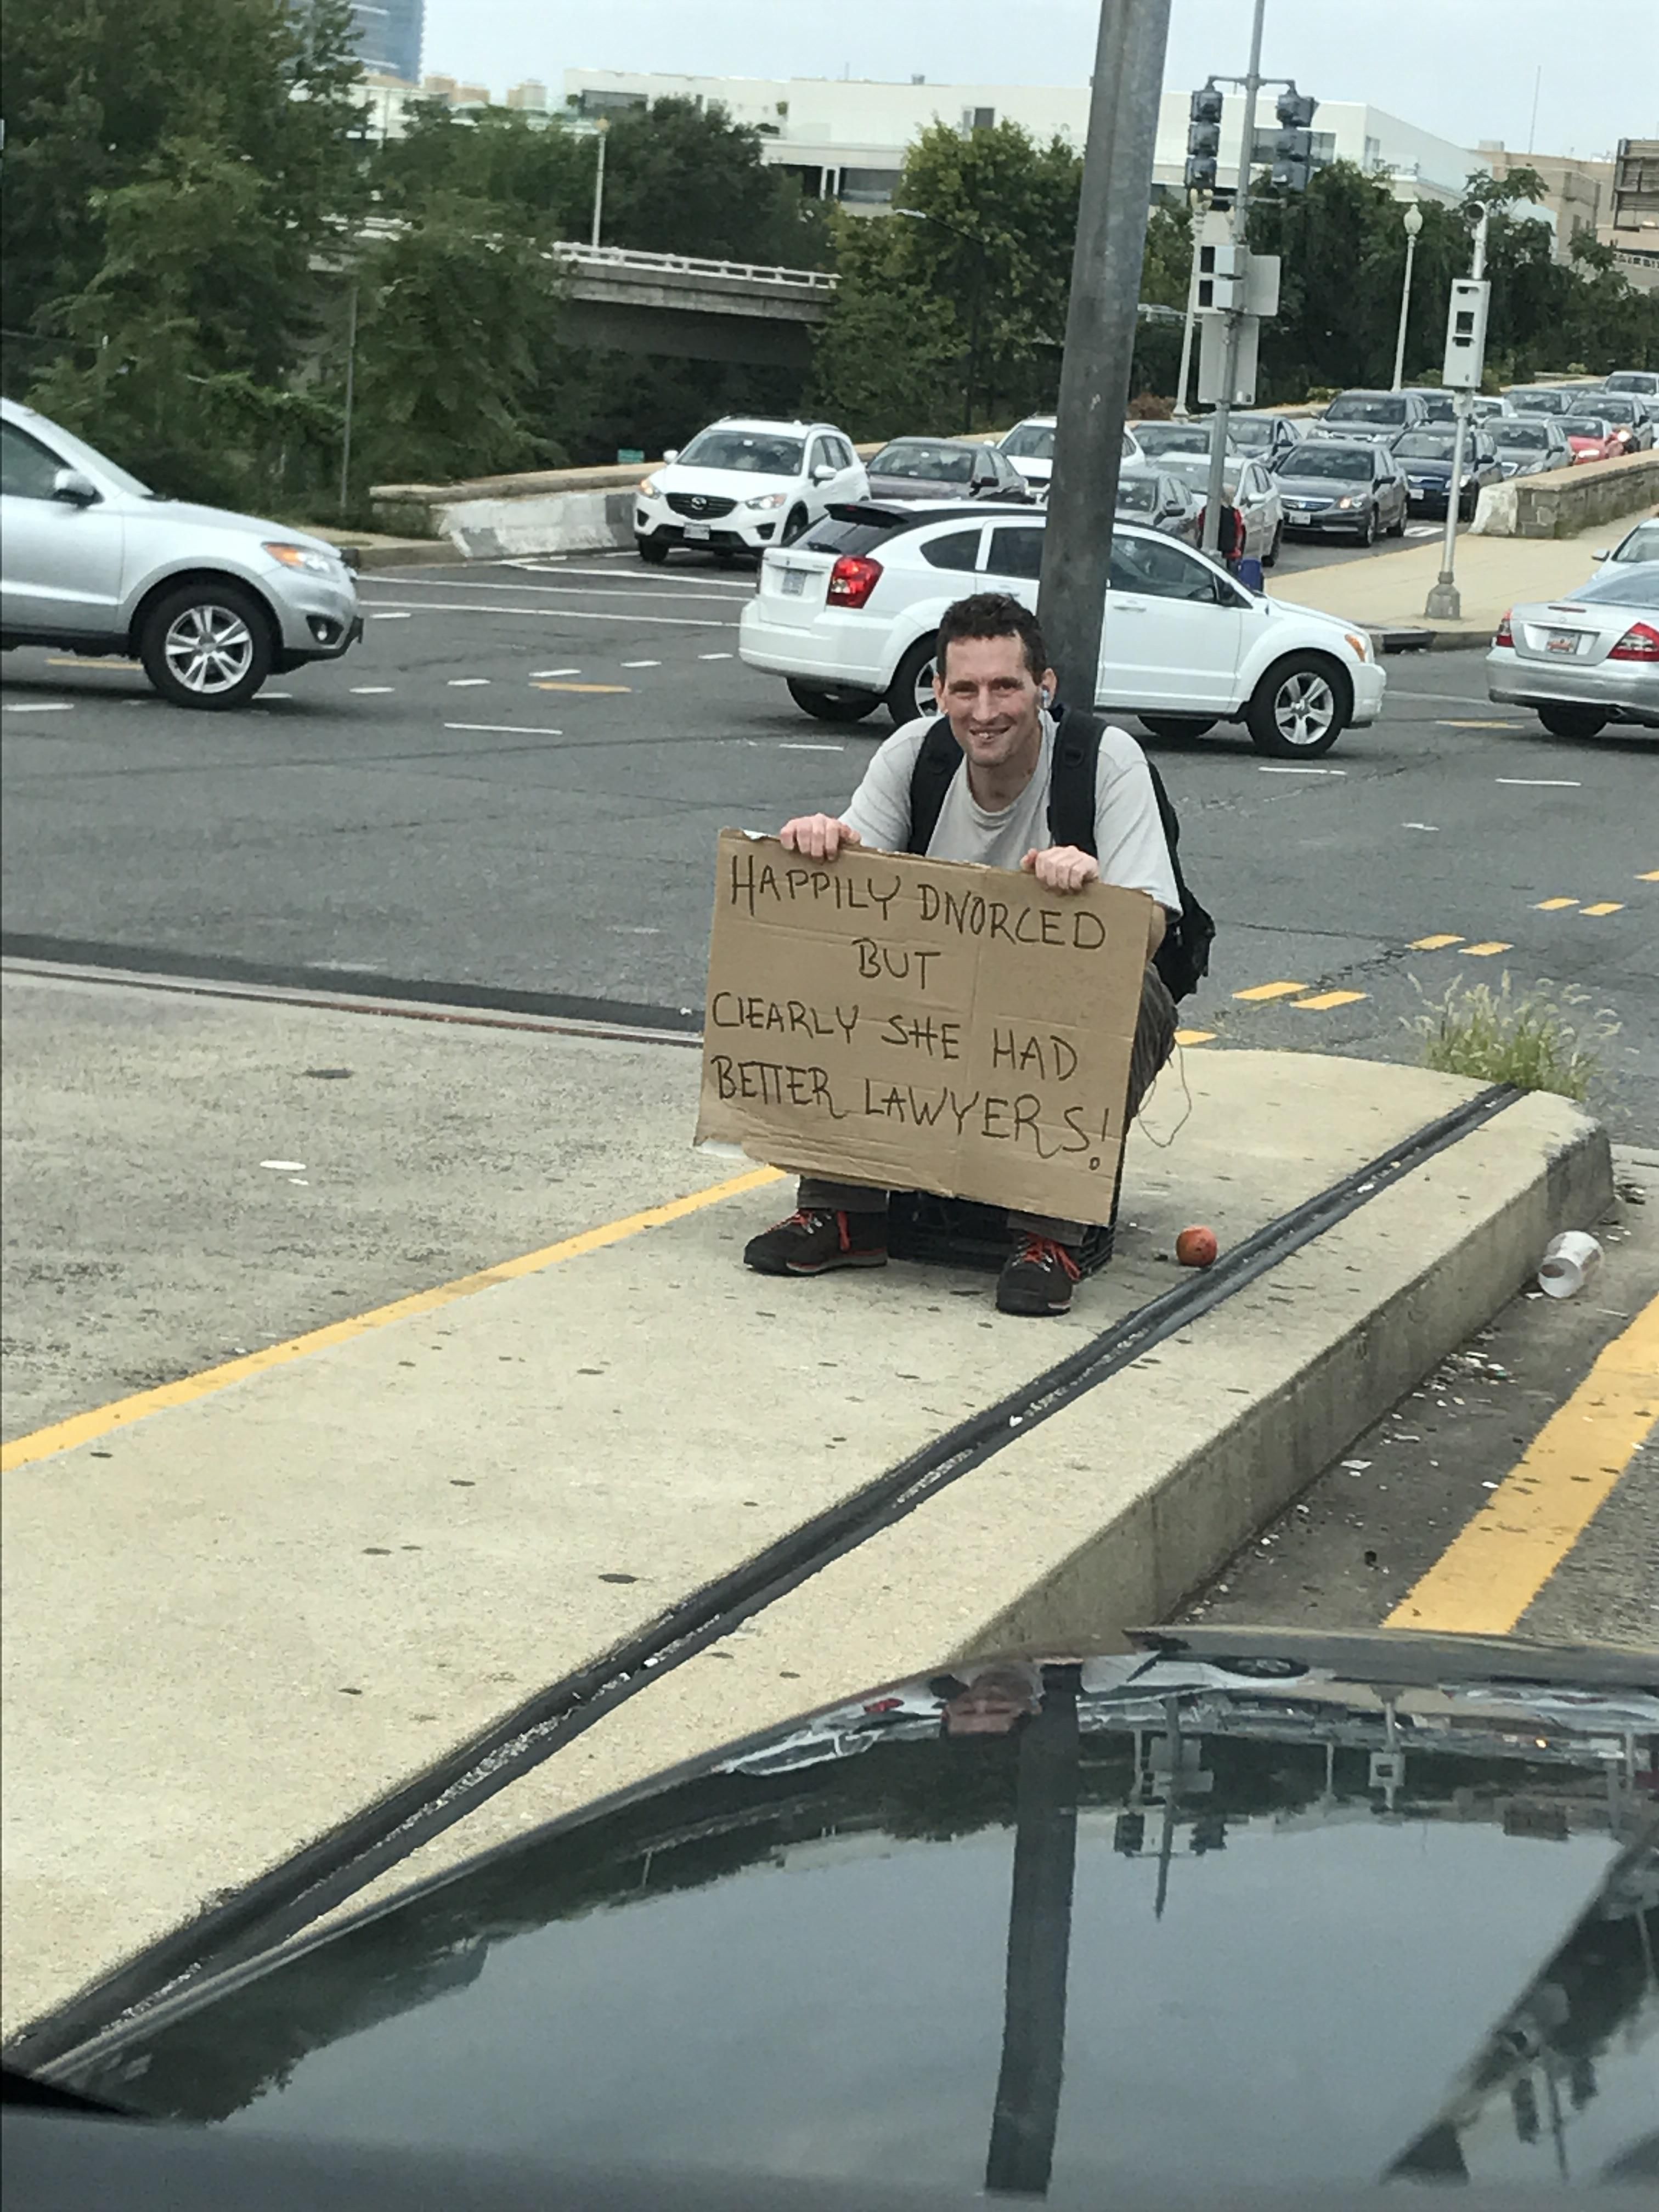 Here's a dollar for your honesty sir